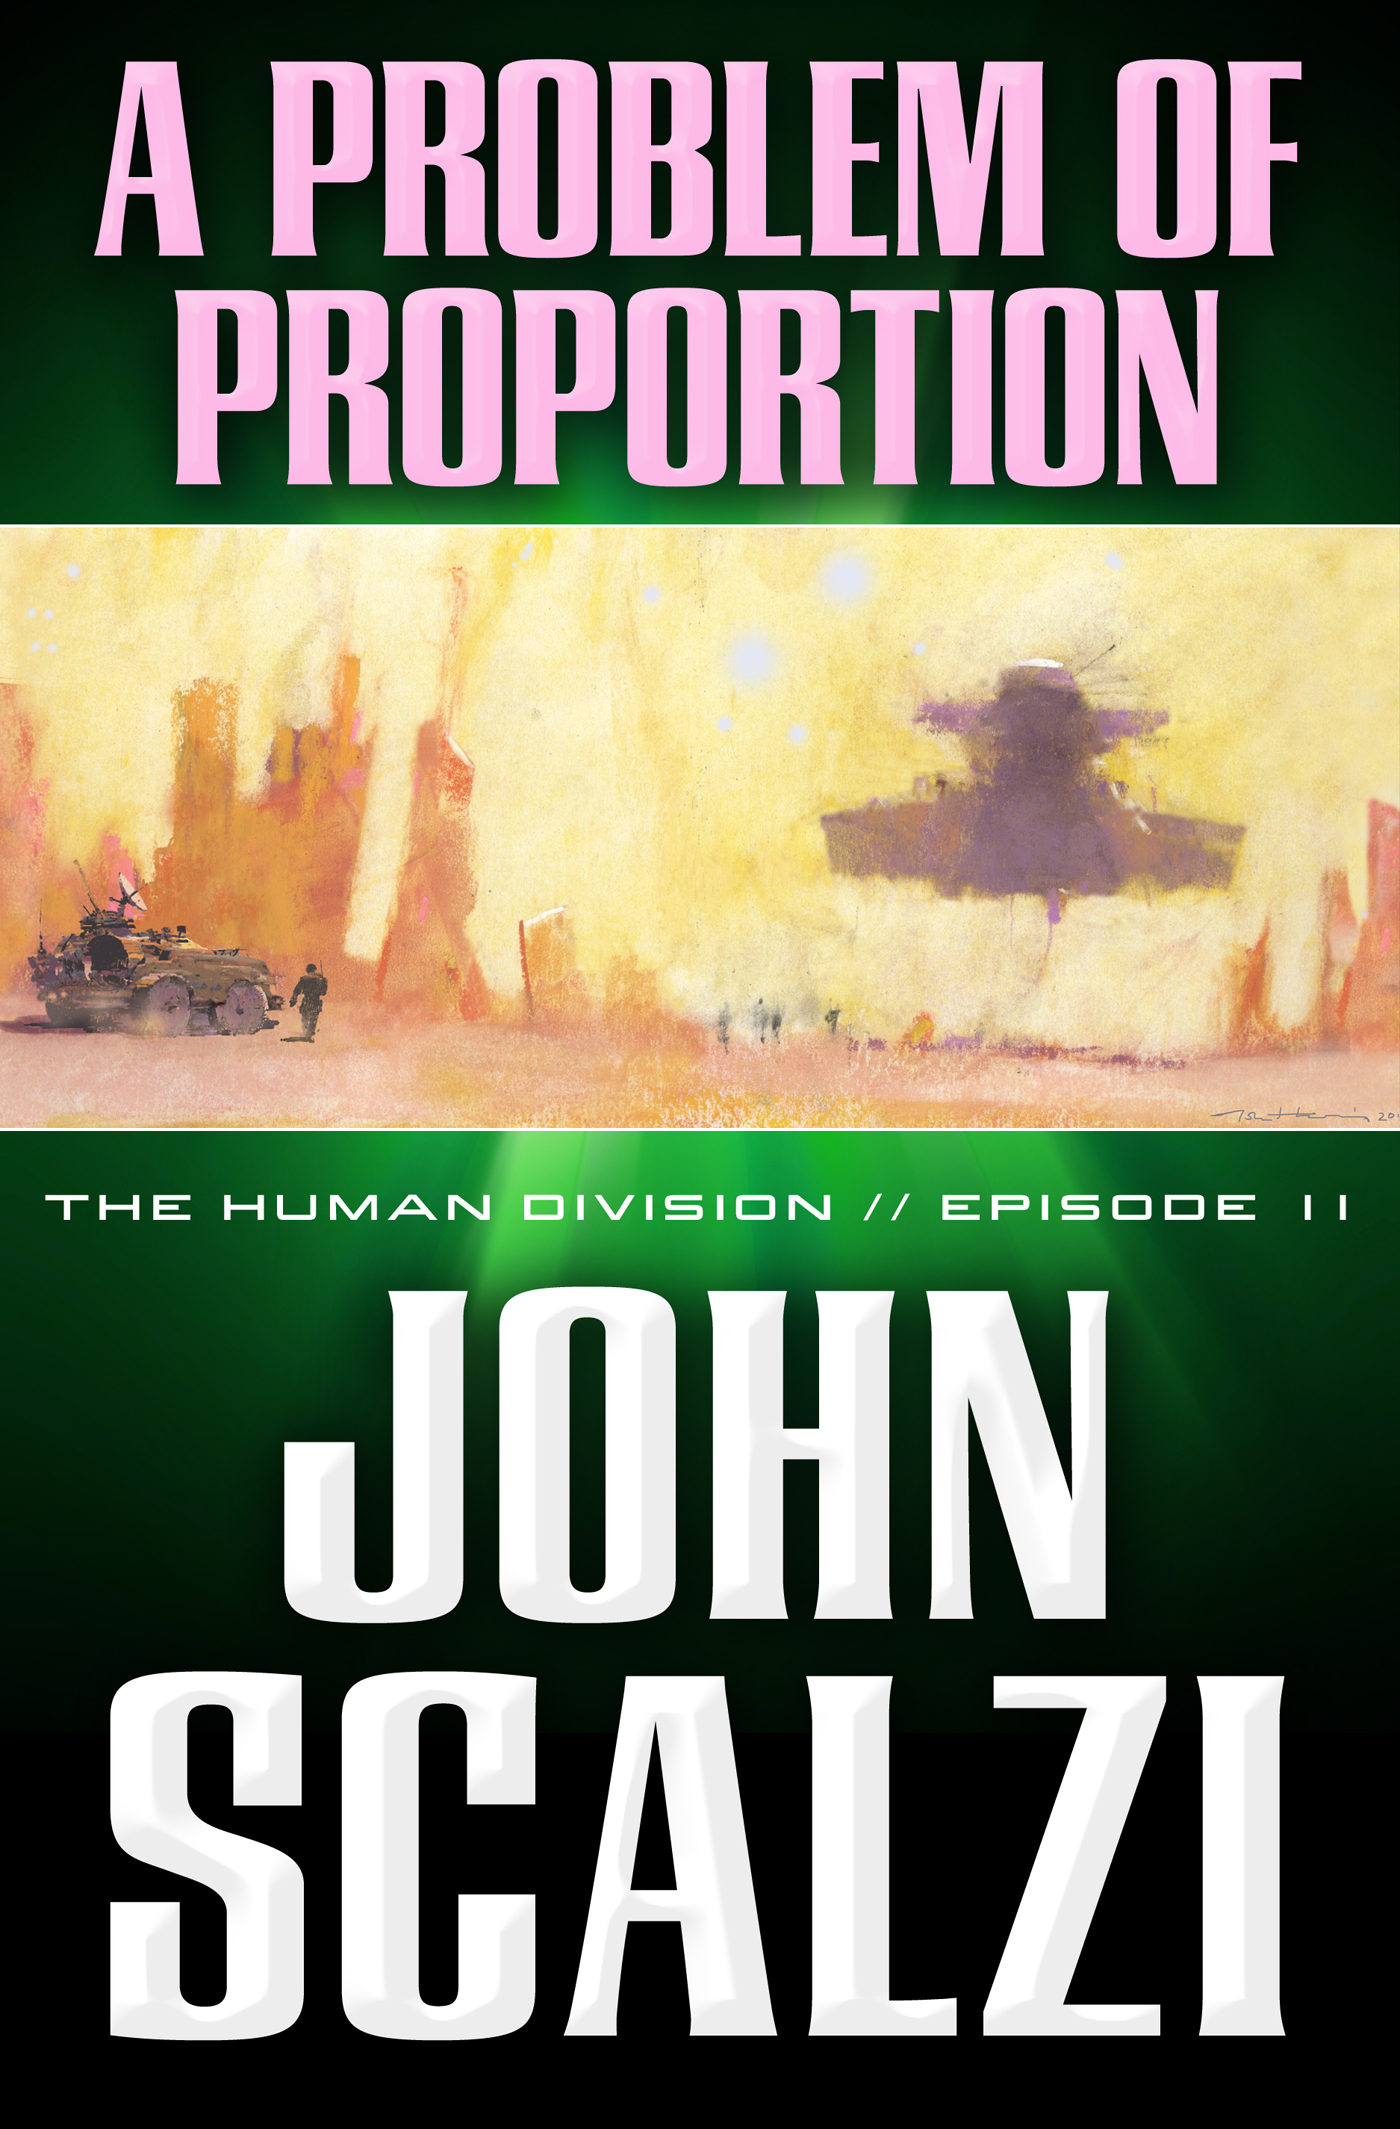 The Human Division #11: A Problem of Proportion by John Scalzi